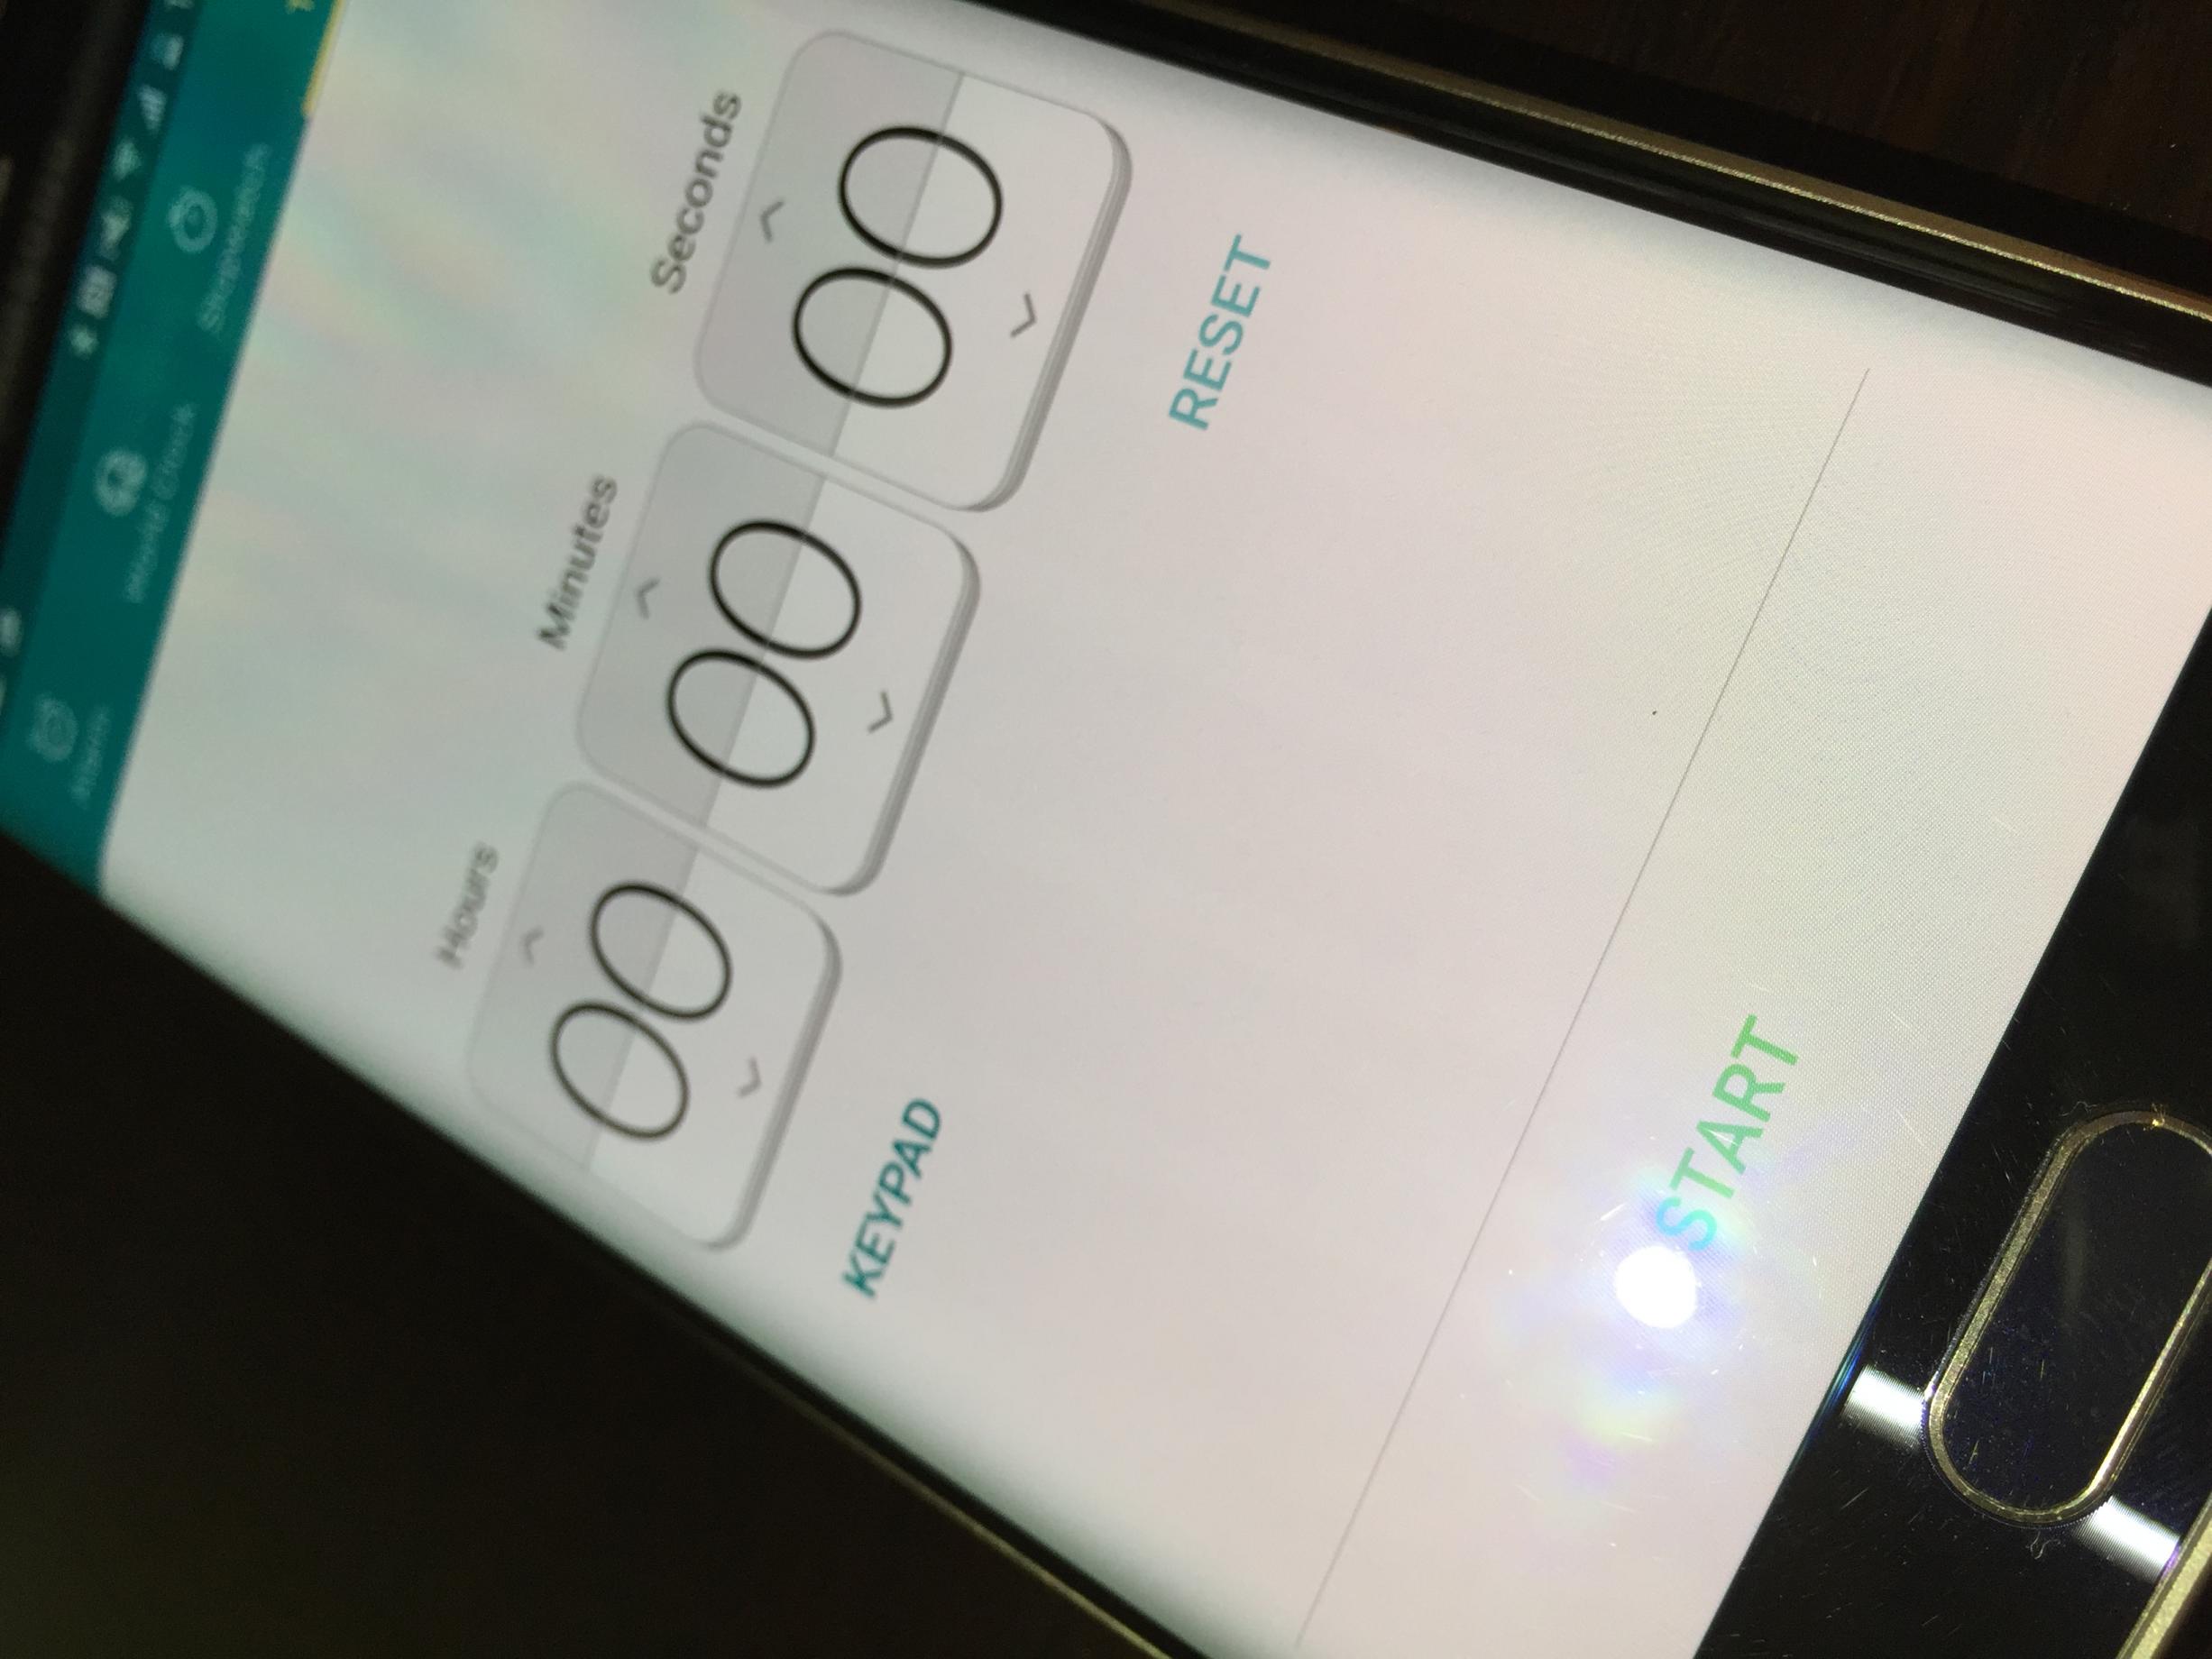 Some T-Mobile customers claim their Galaxy S6 edge units have scratches and dead ...